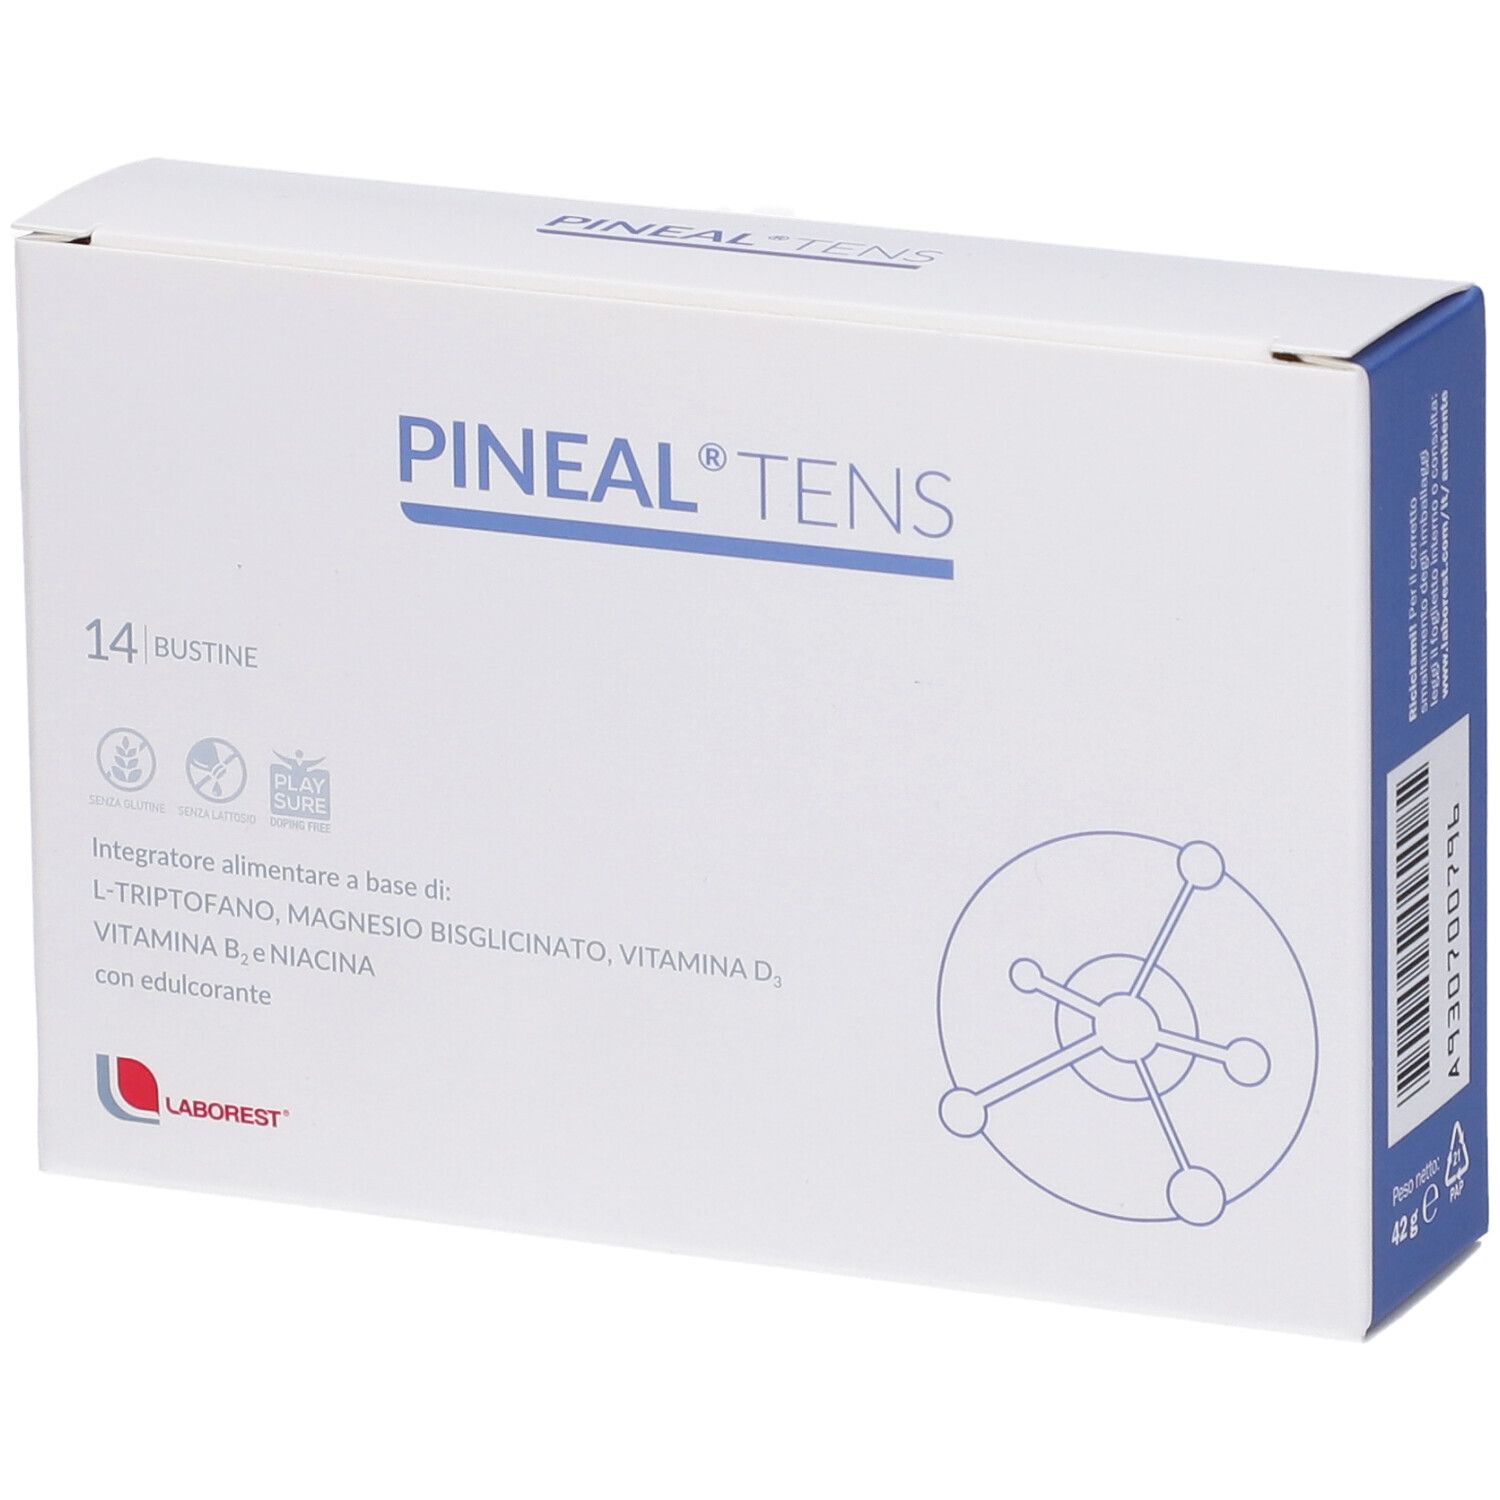 Laborest® Pineal® Tens Bustine